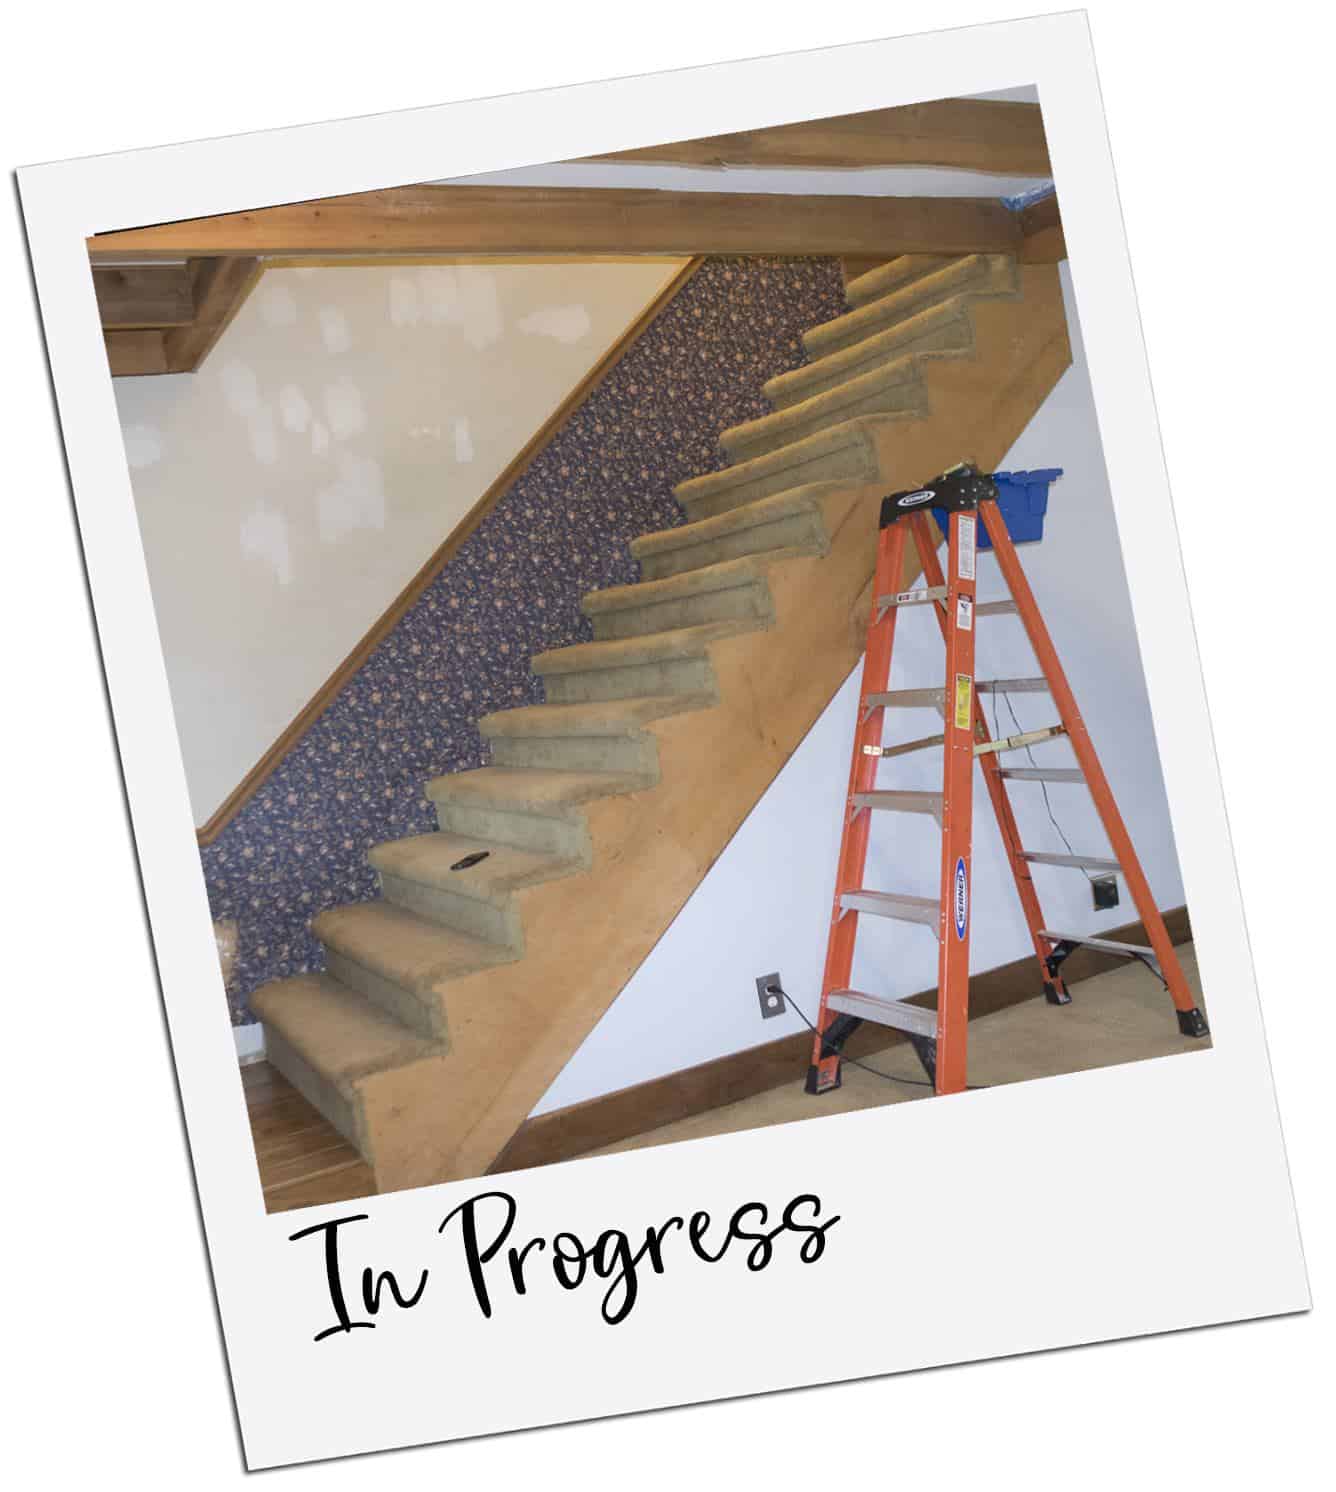 Carpeted open staircase with a ladder standing next to it.